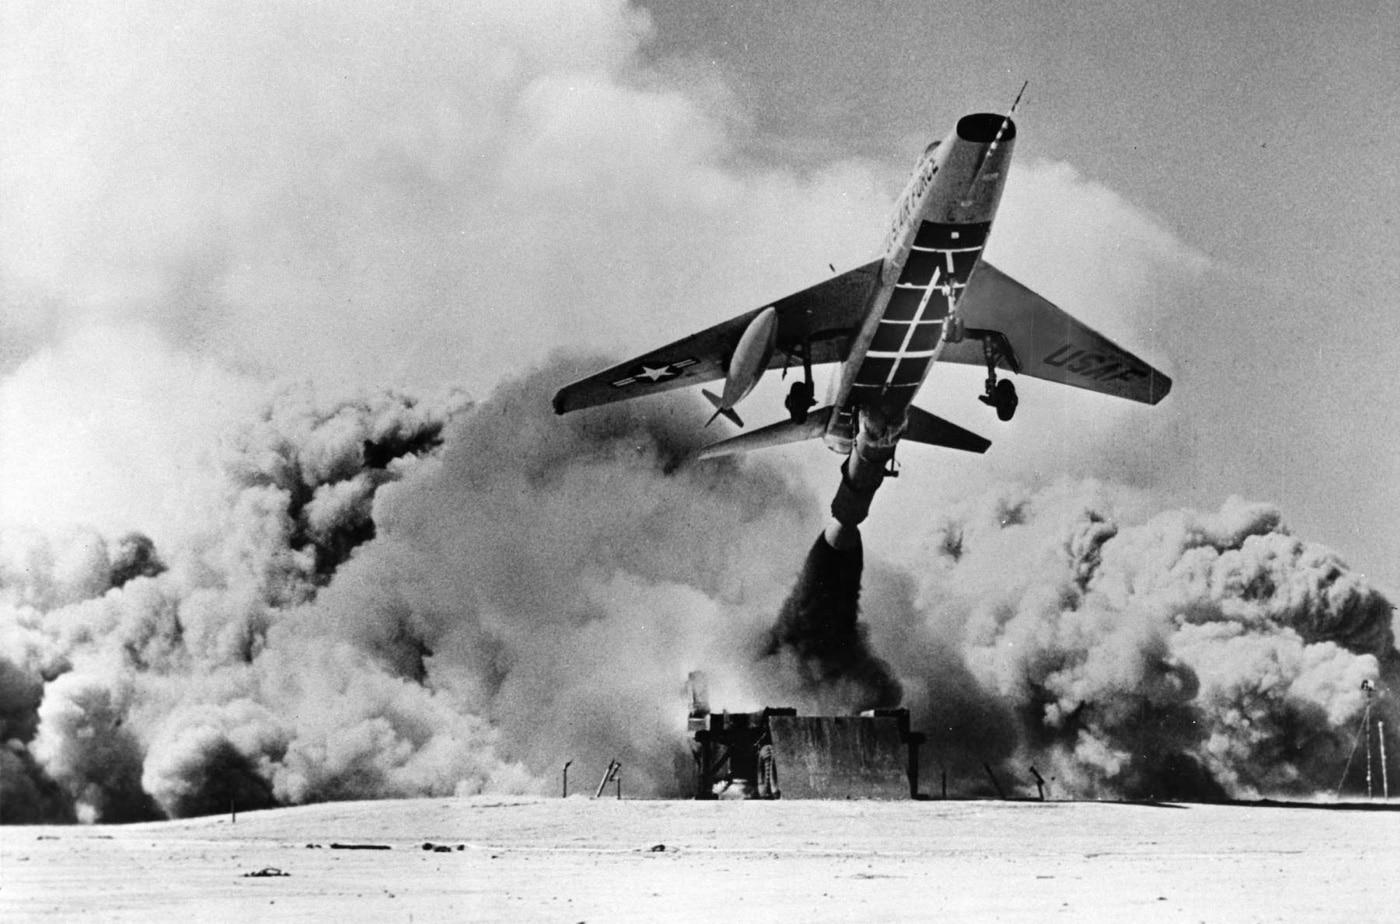 zero-length launch system f-100 super sabre test fighter